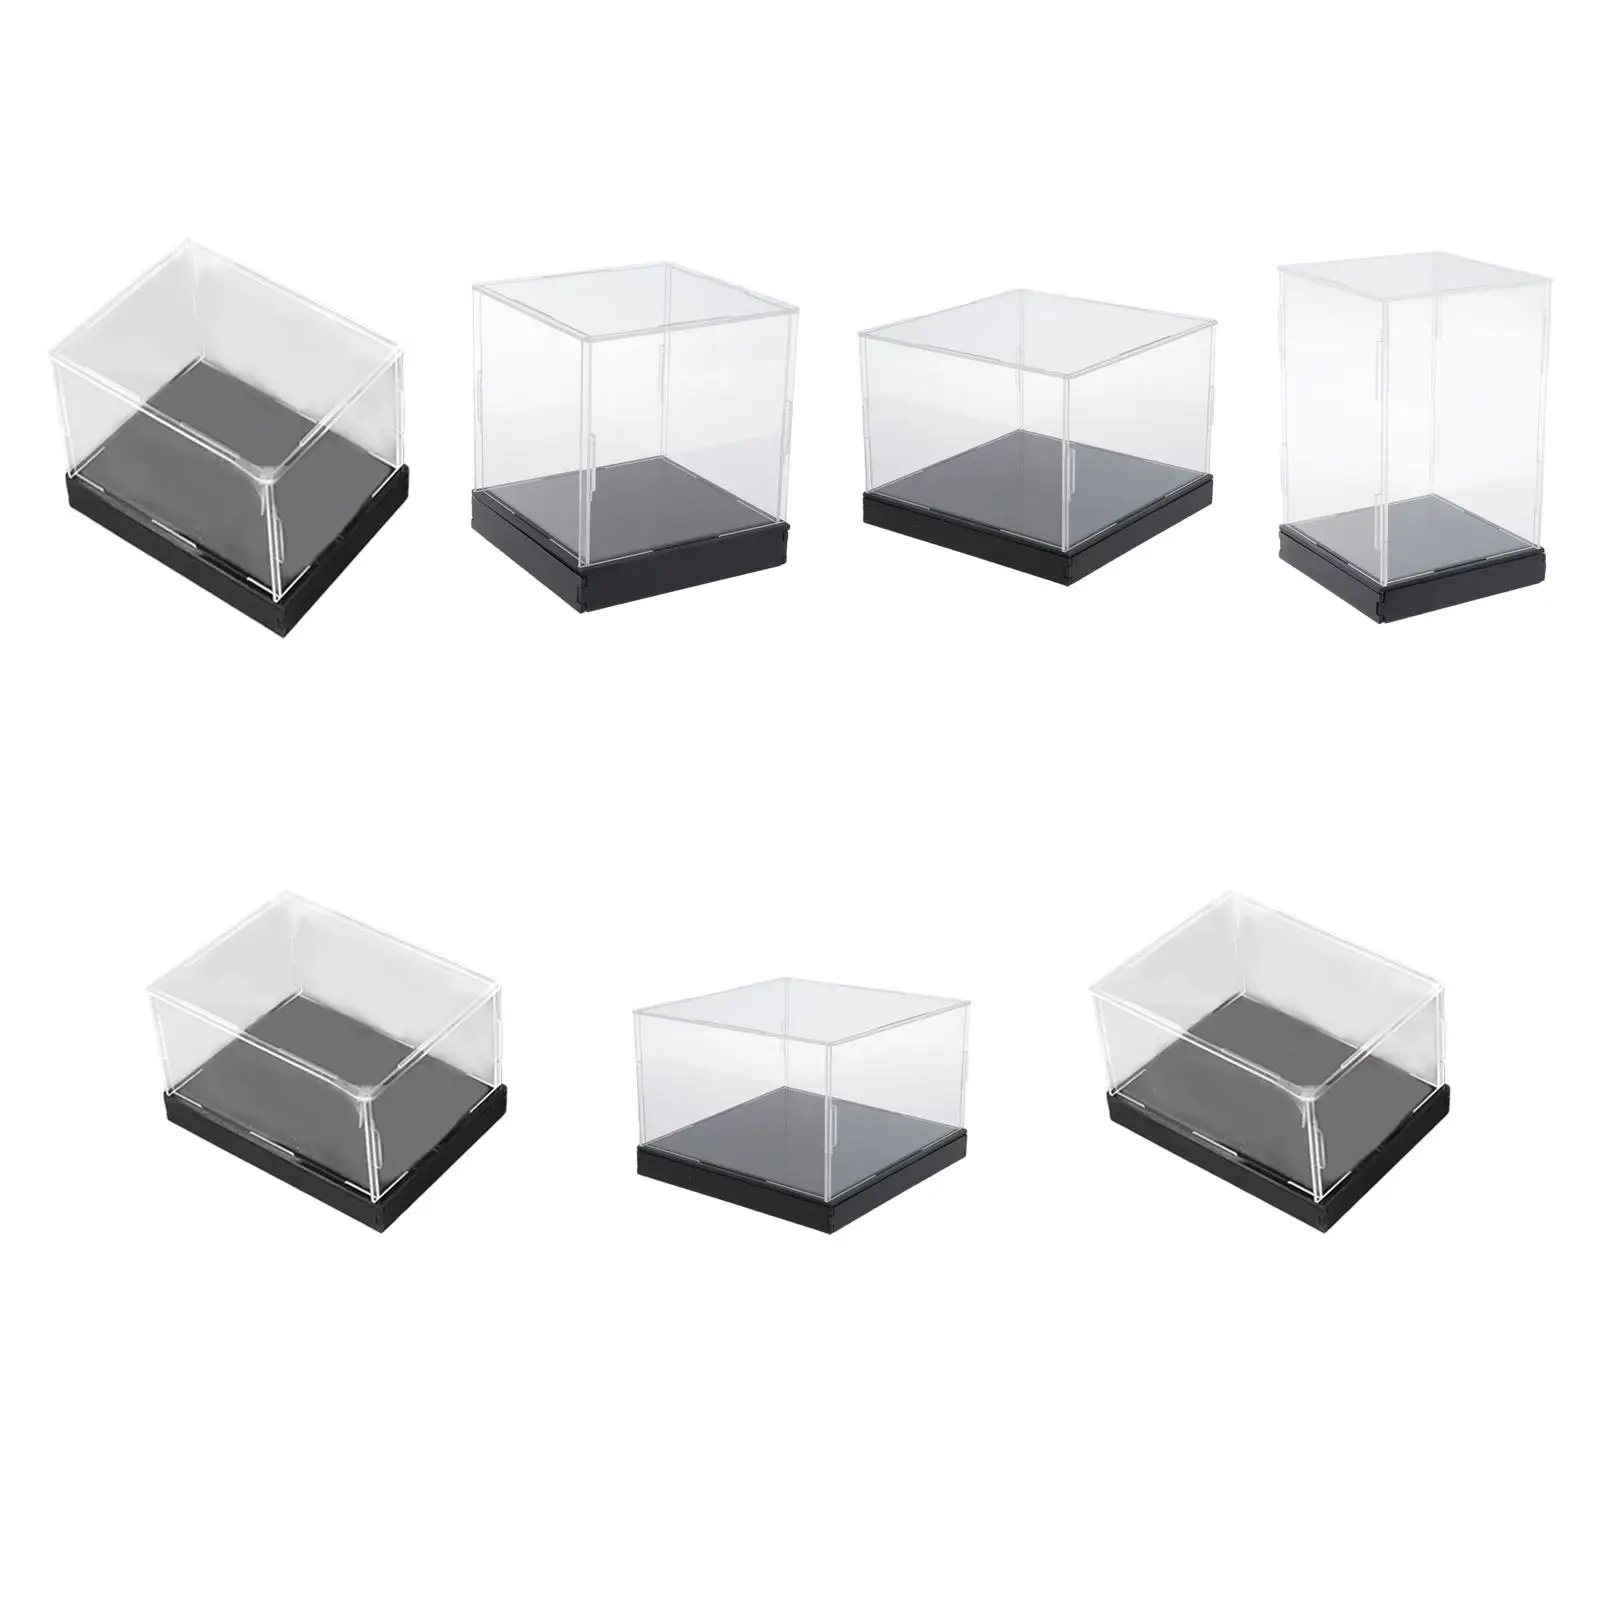 Transparent Acrylic Display Case Black Base Container for Cosmetics Miniature Figurines Doll Toy Display Show Case